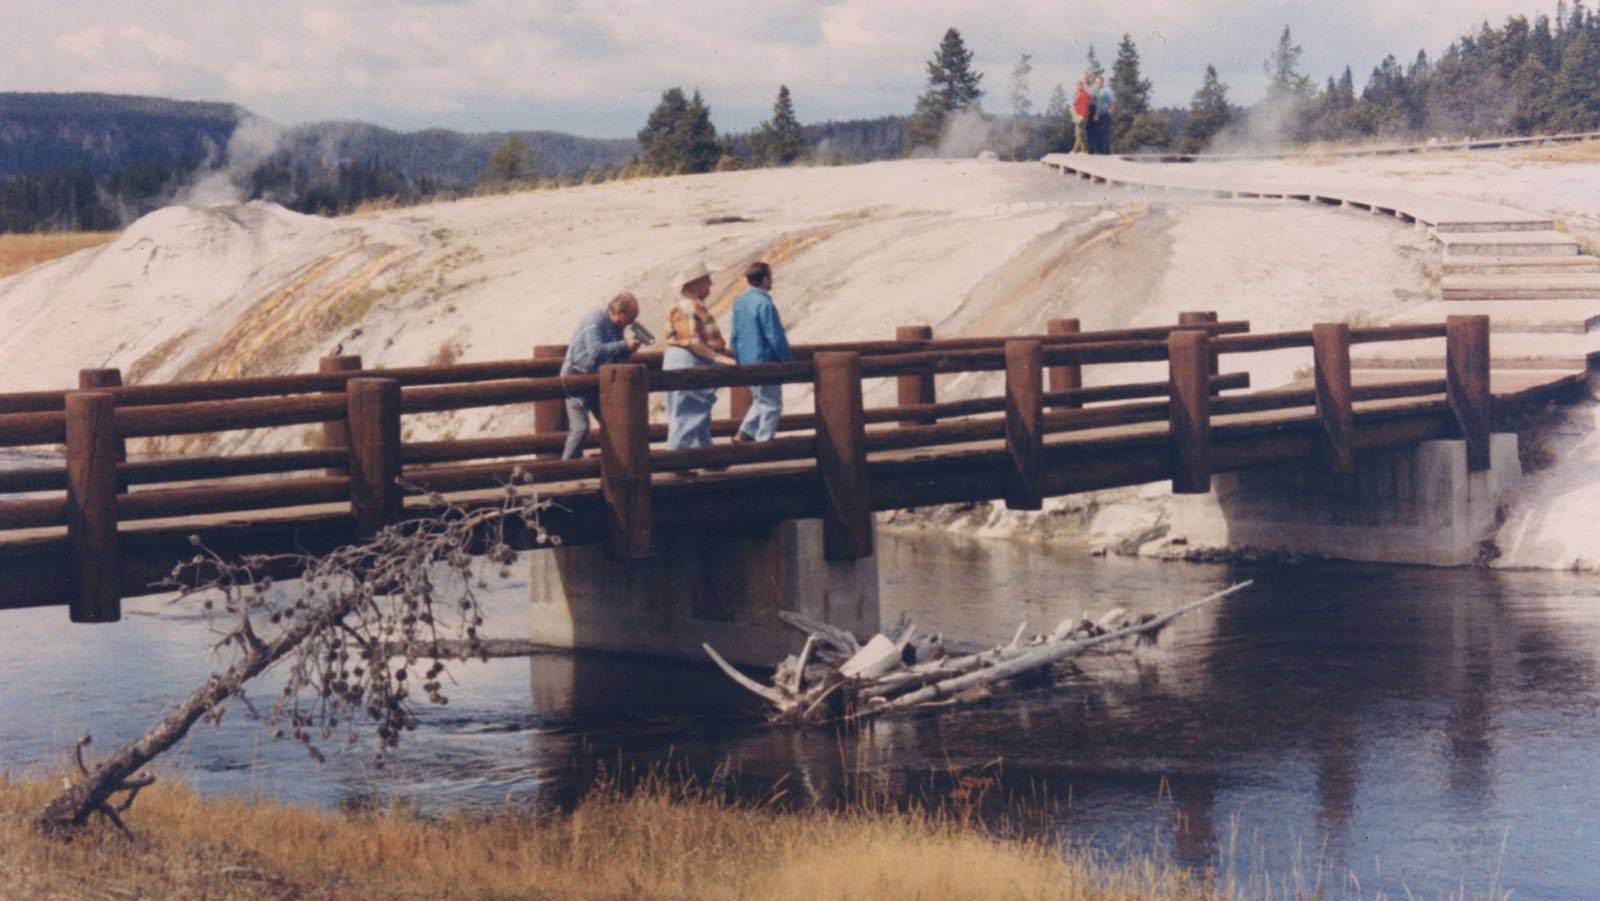 Yellowstone National Park was the backdrop for the hilarious and spontaneous hijinks of The Three Stooges in 1969.